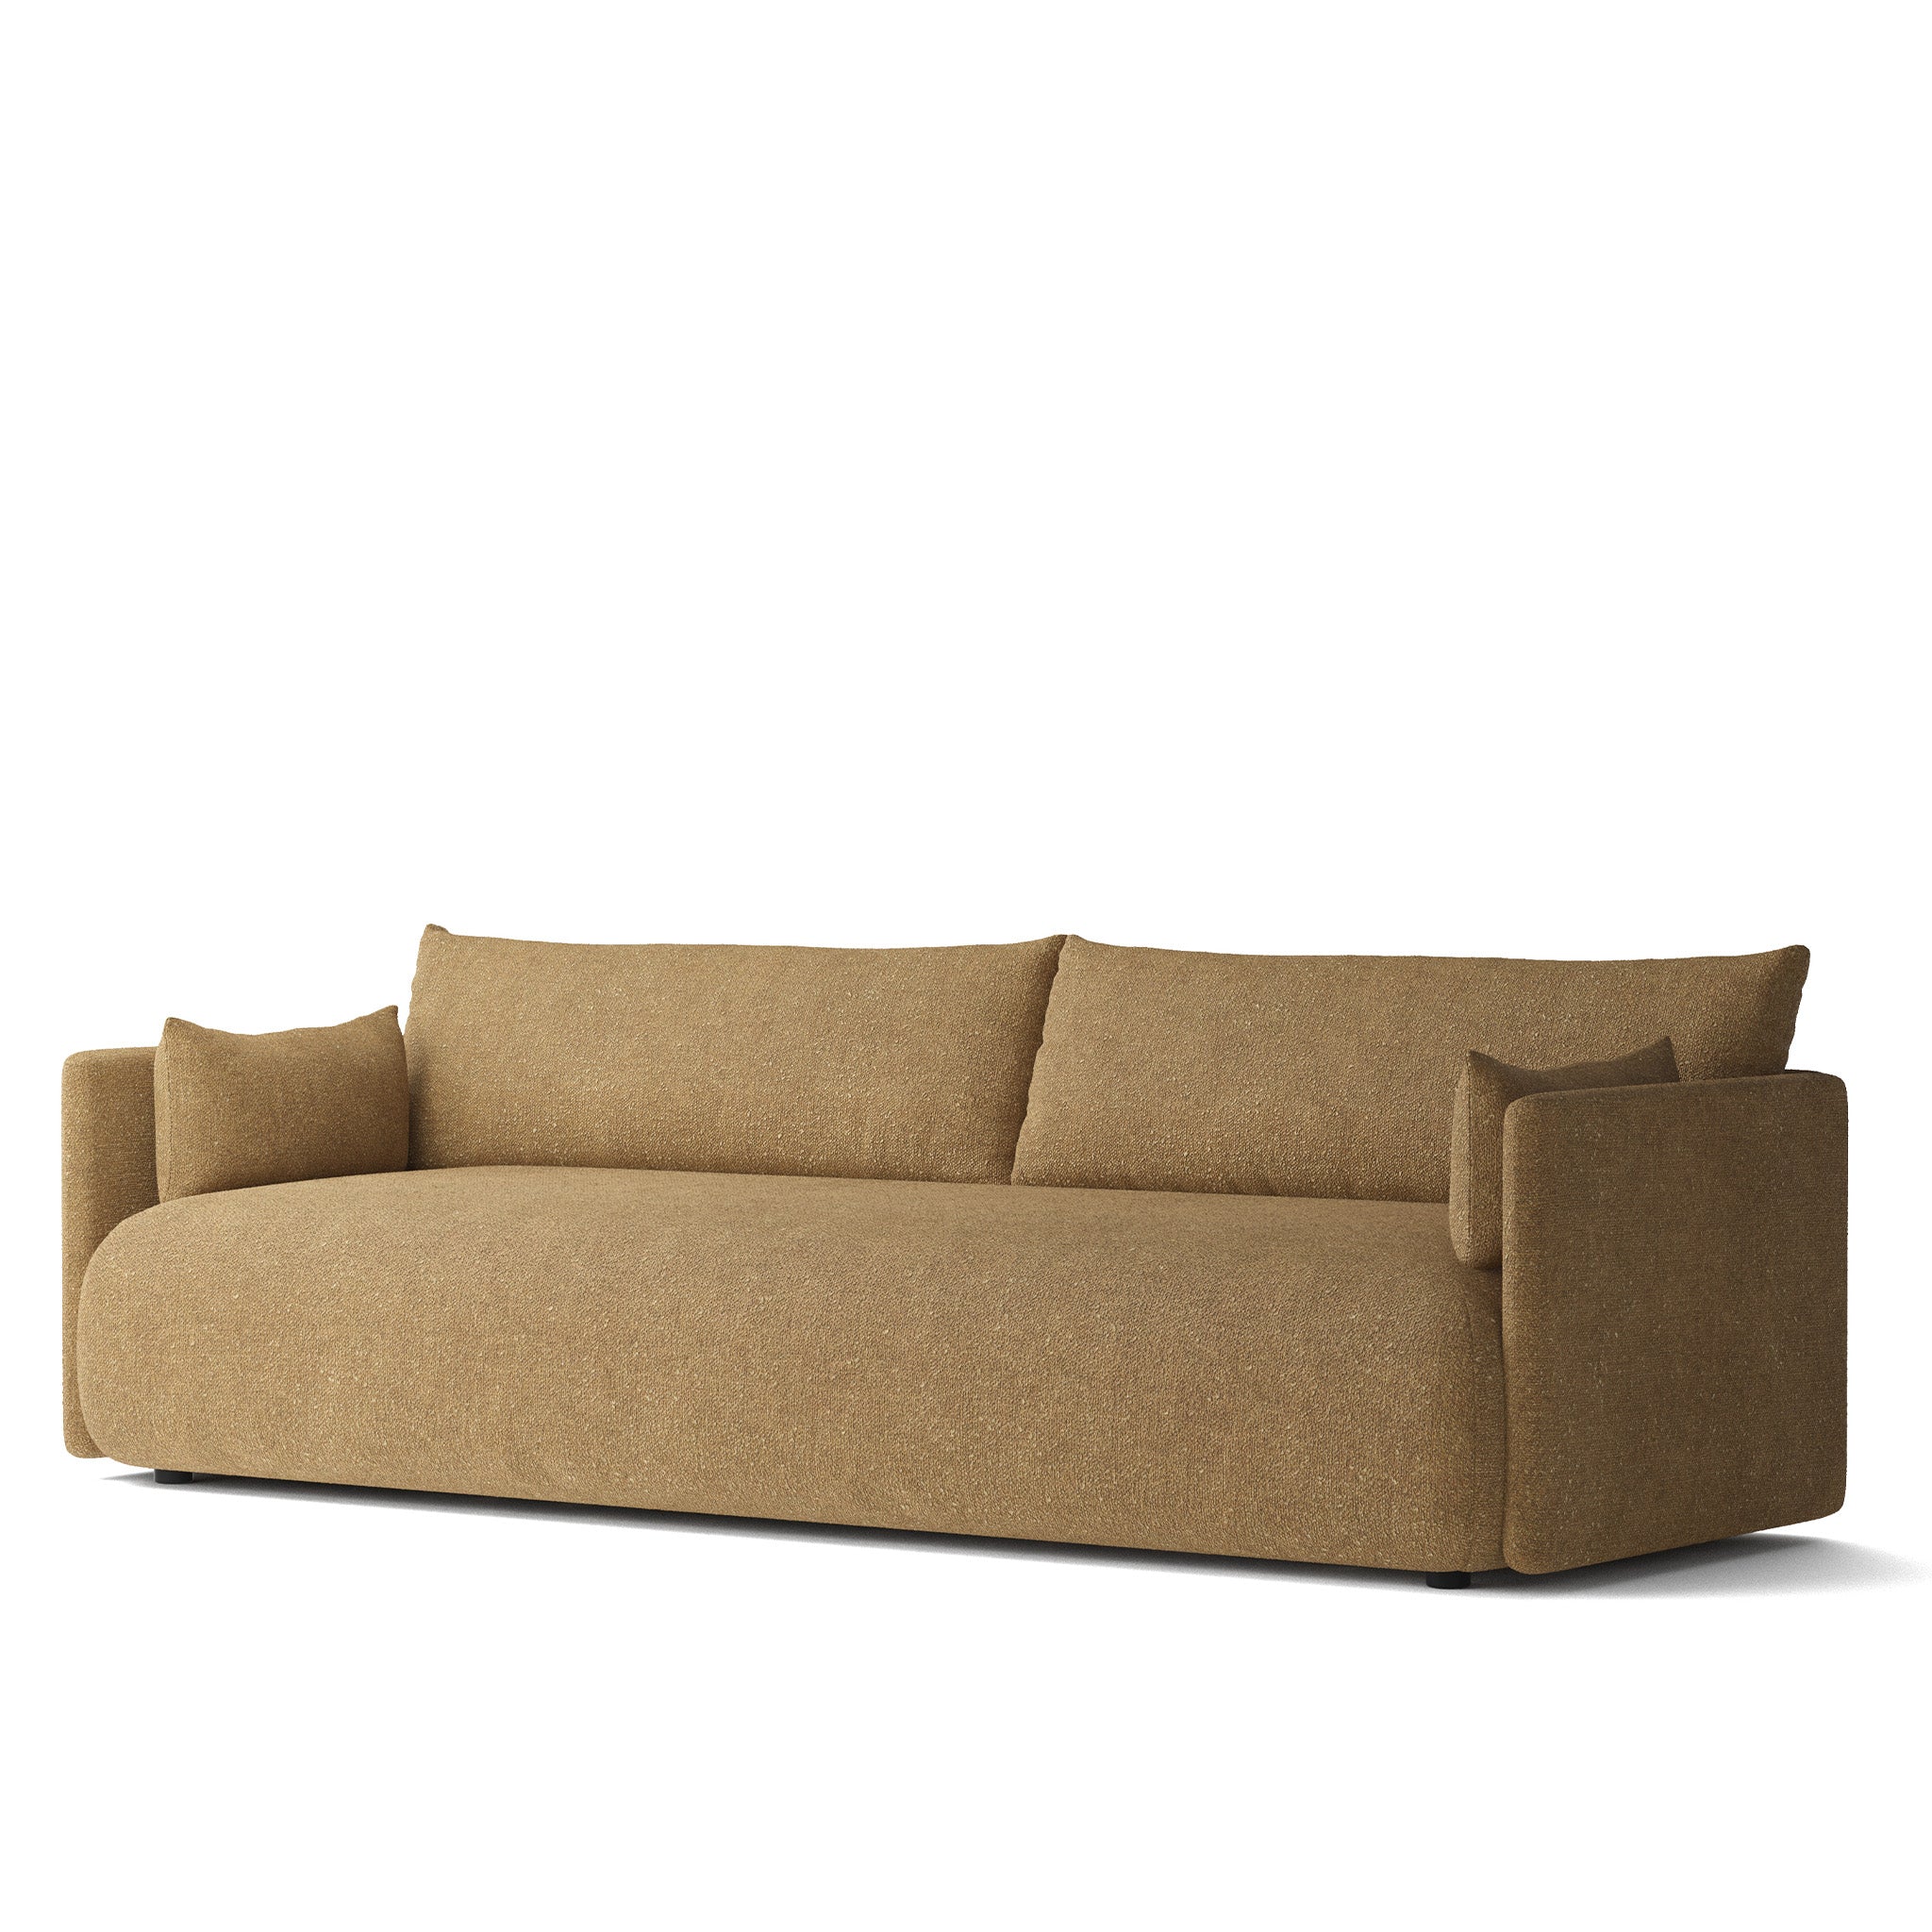 Offset 3-Seater Sofa by Norm Architects